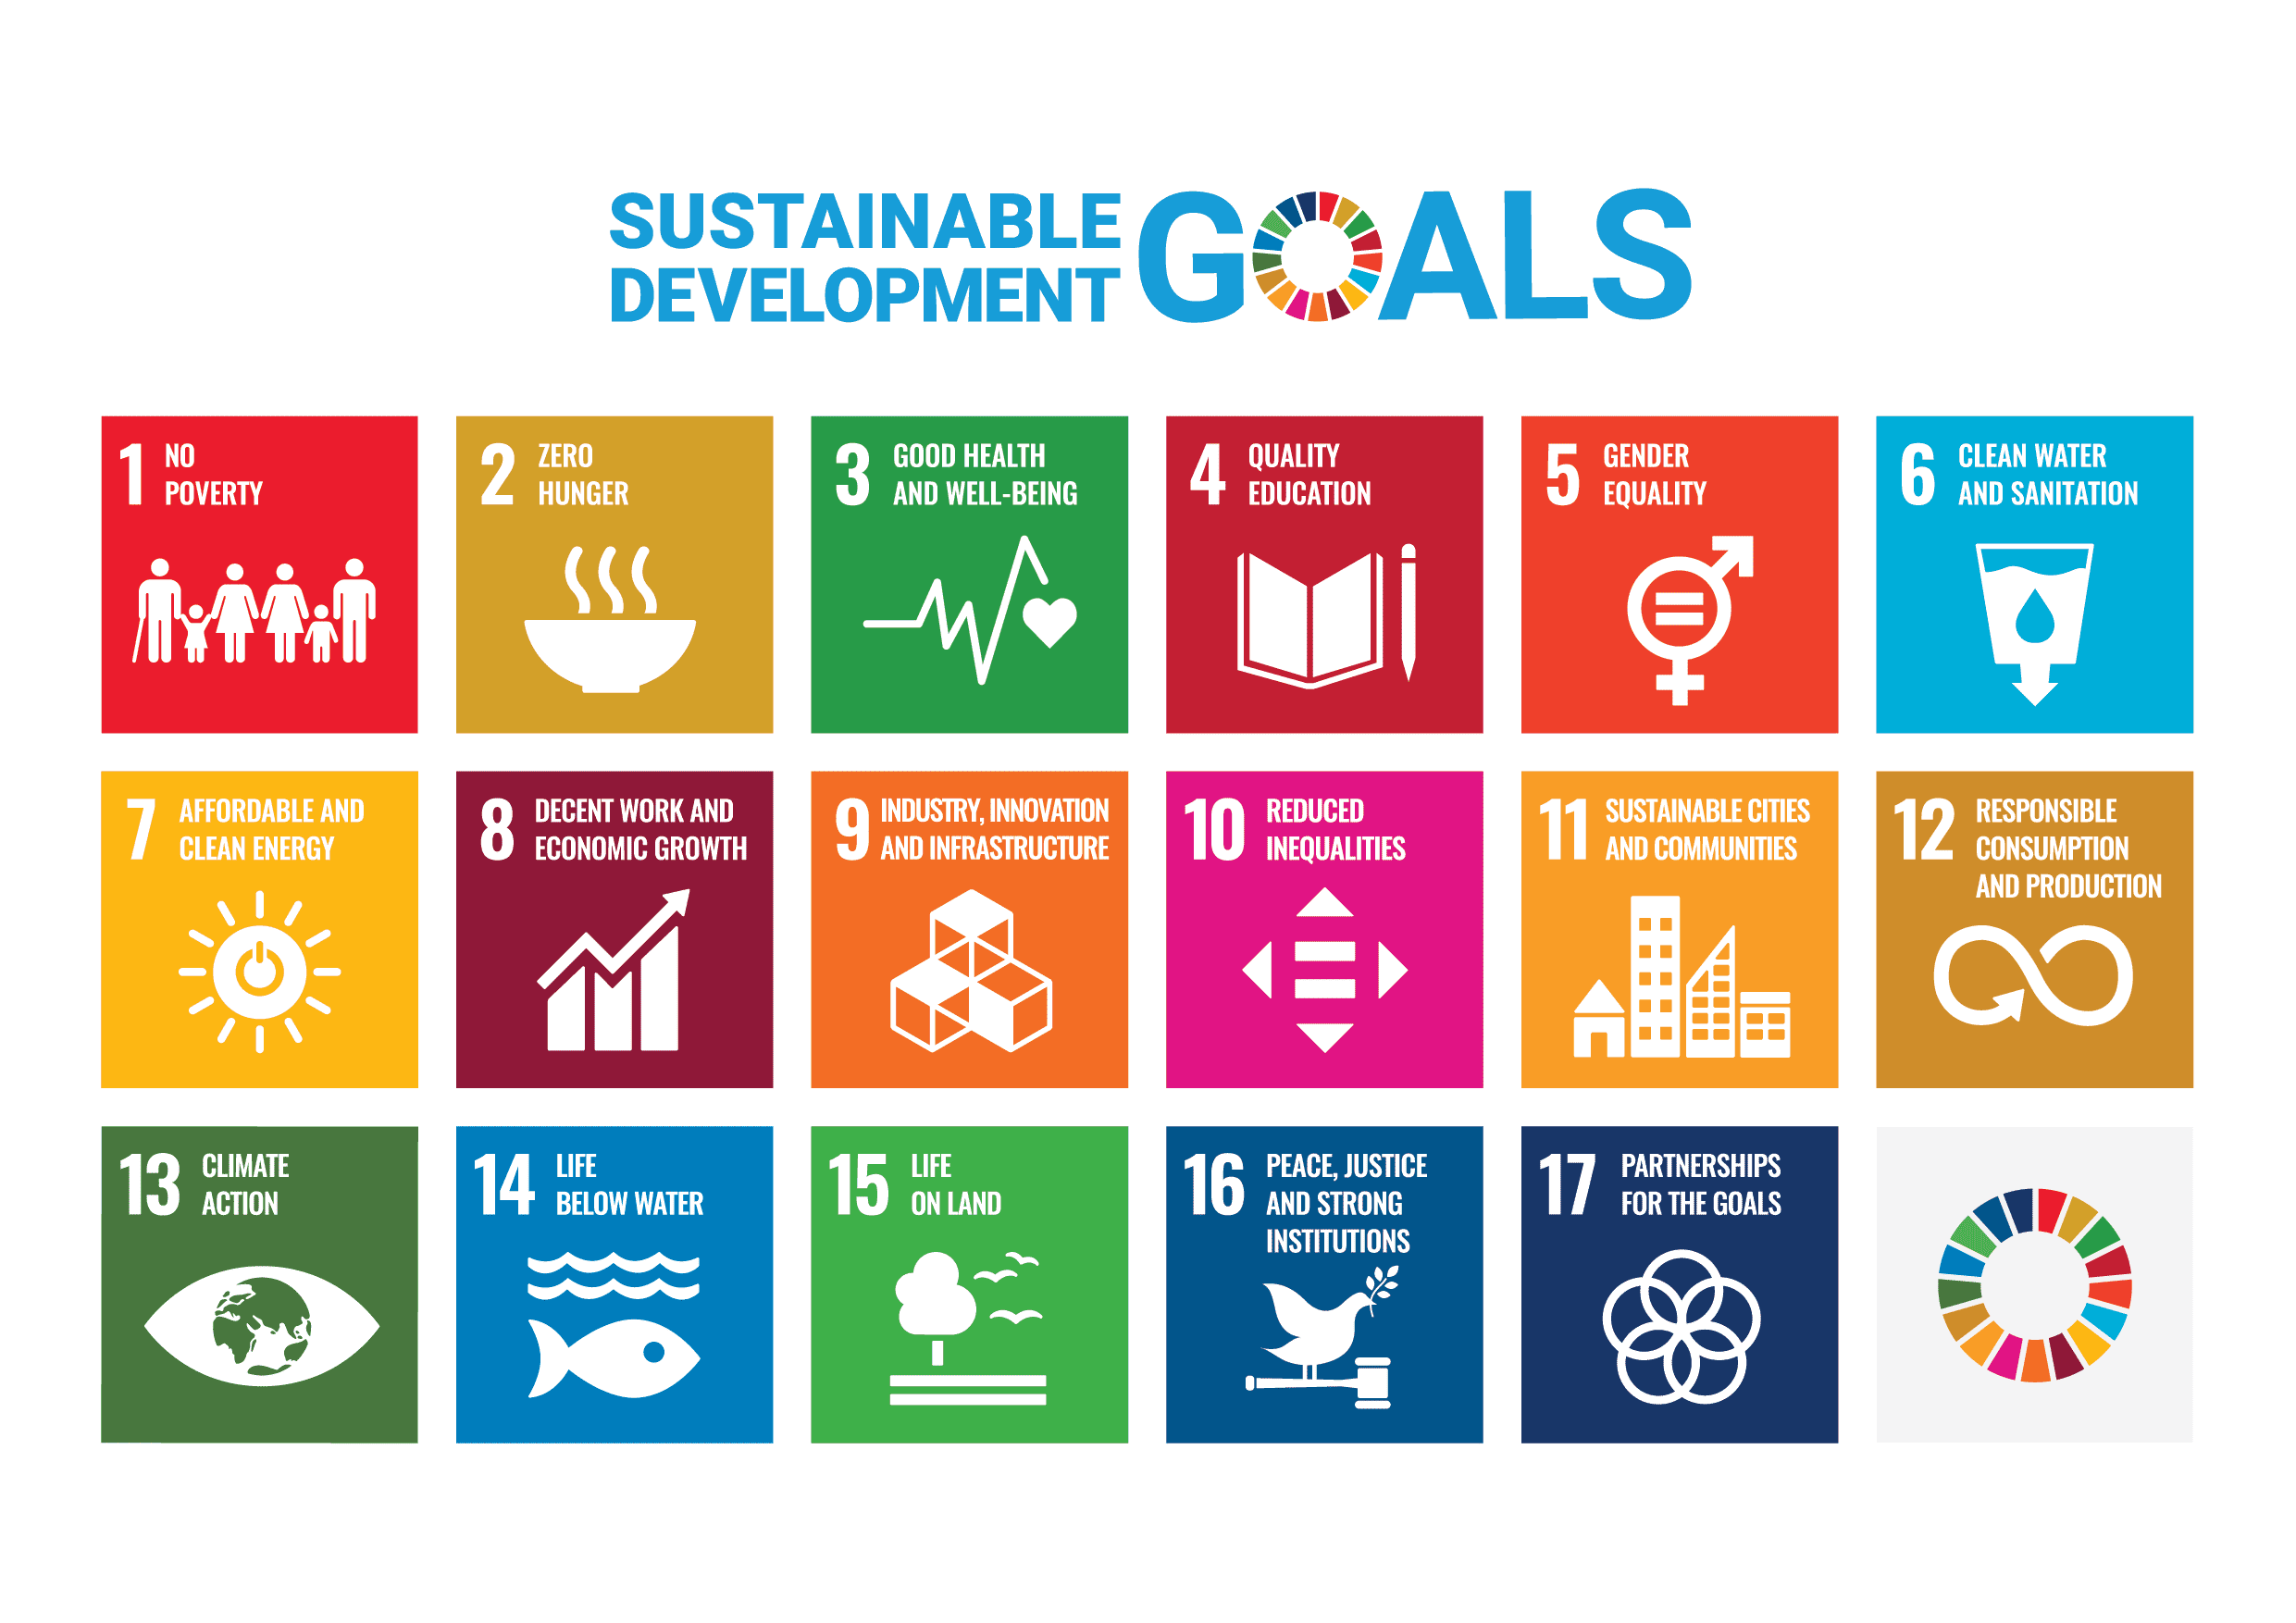 The United Nation's 17 Sustainable Development Goals